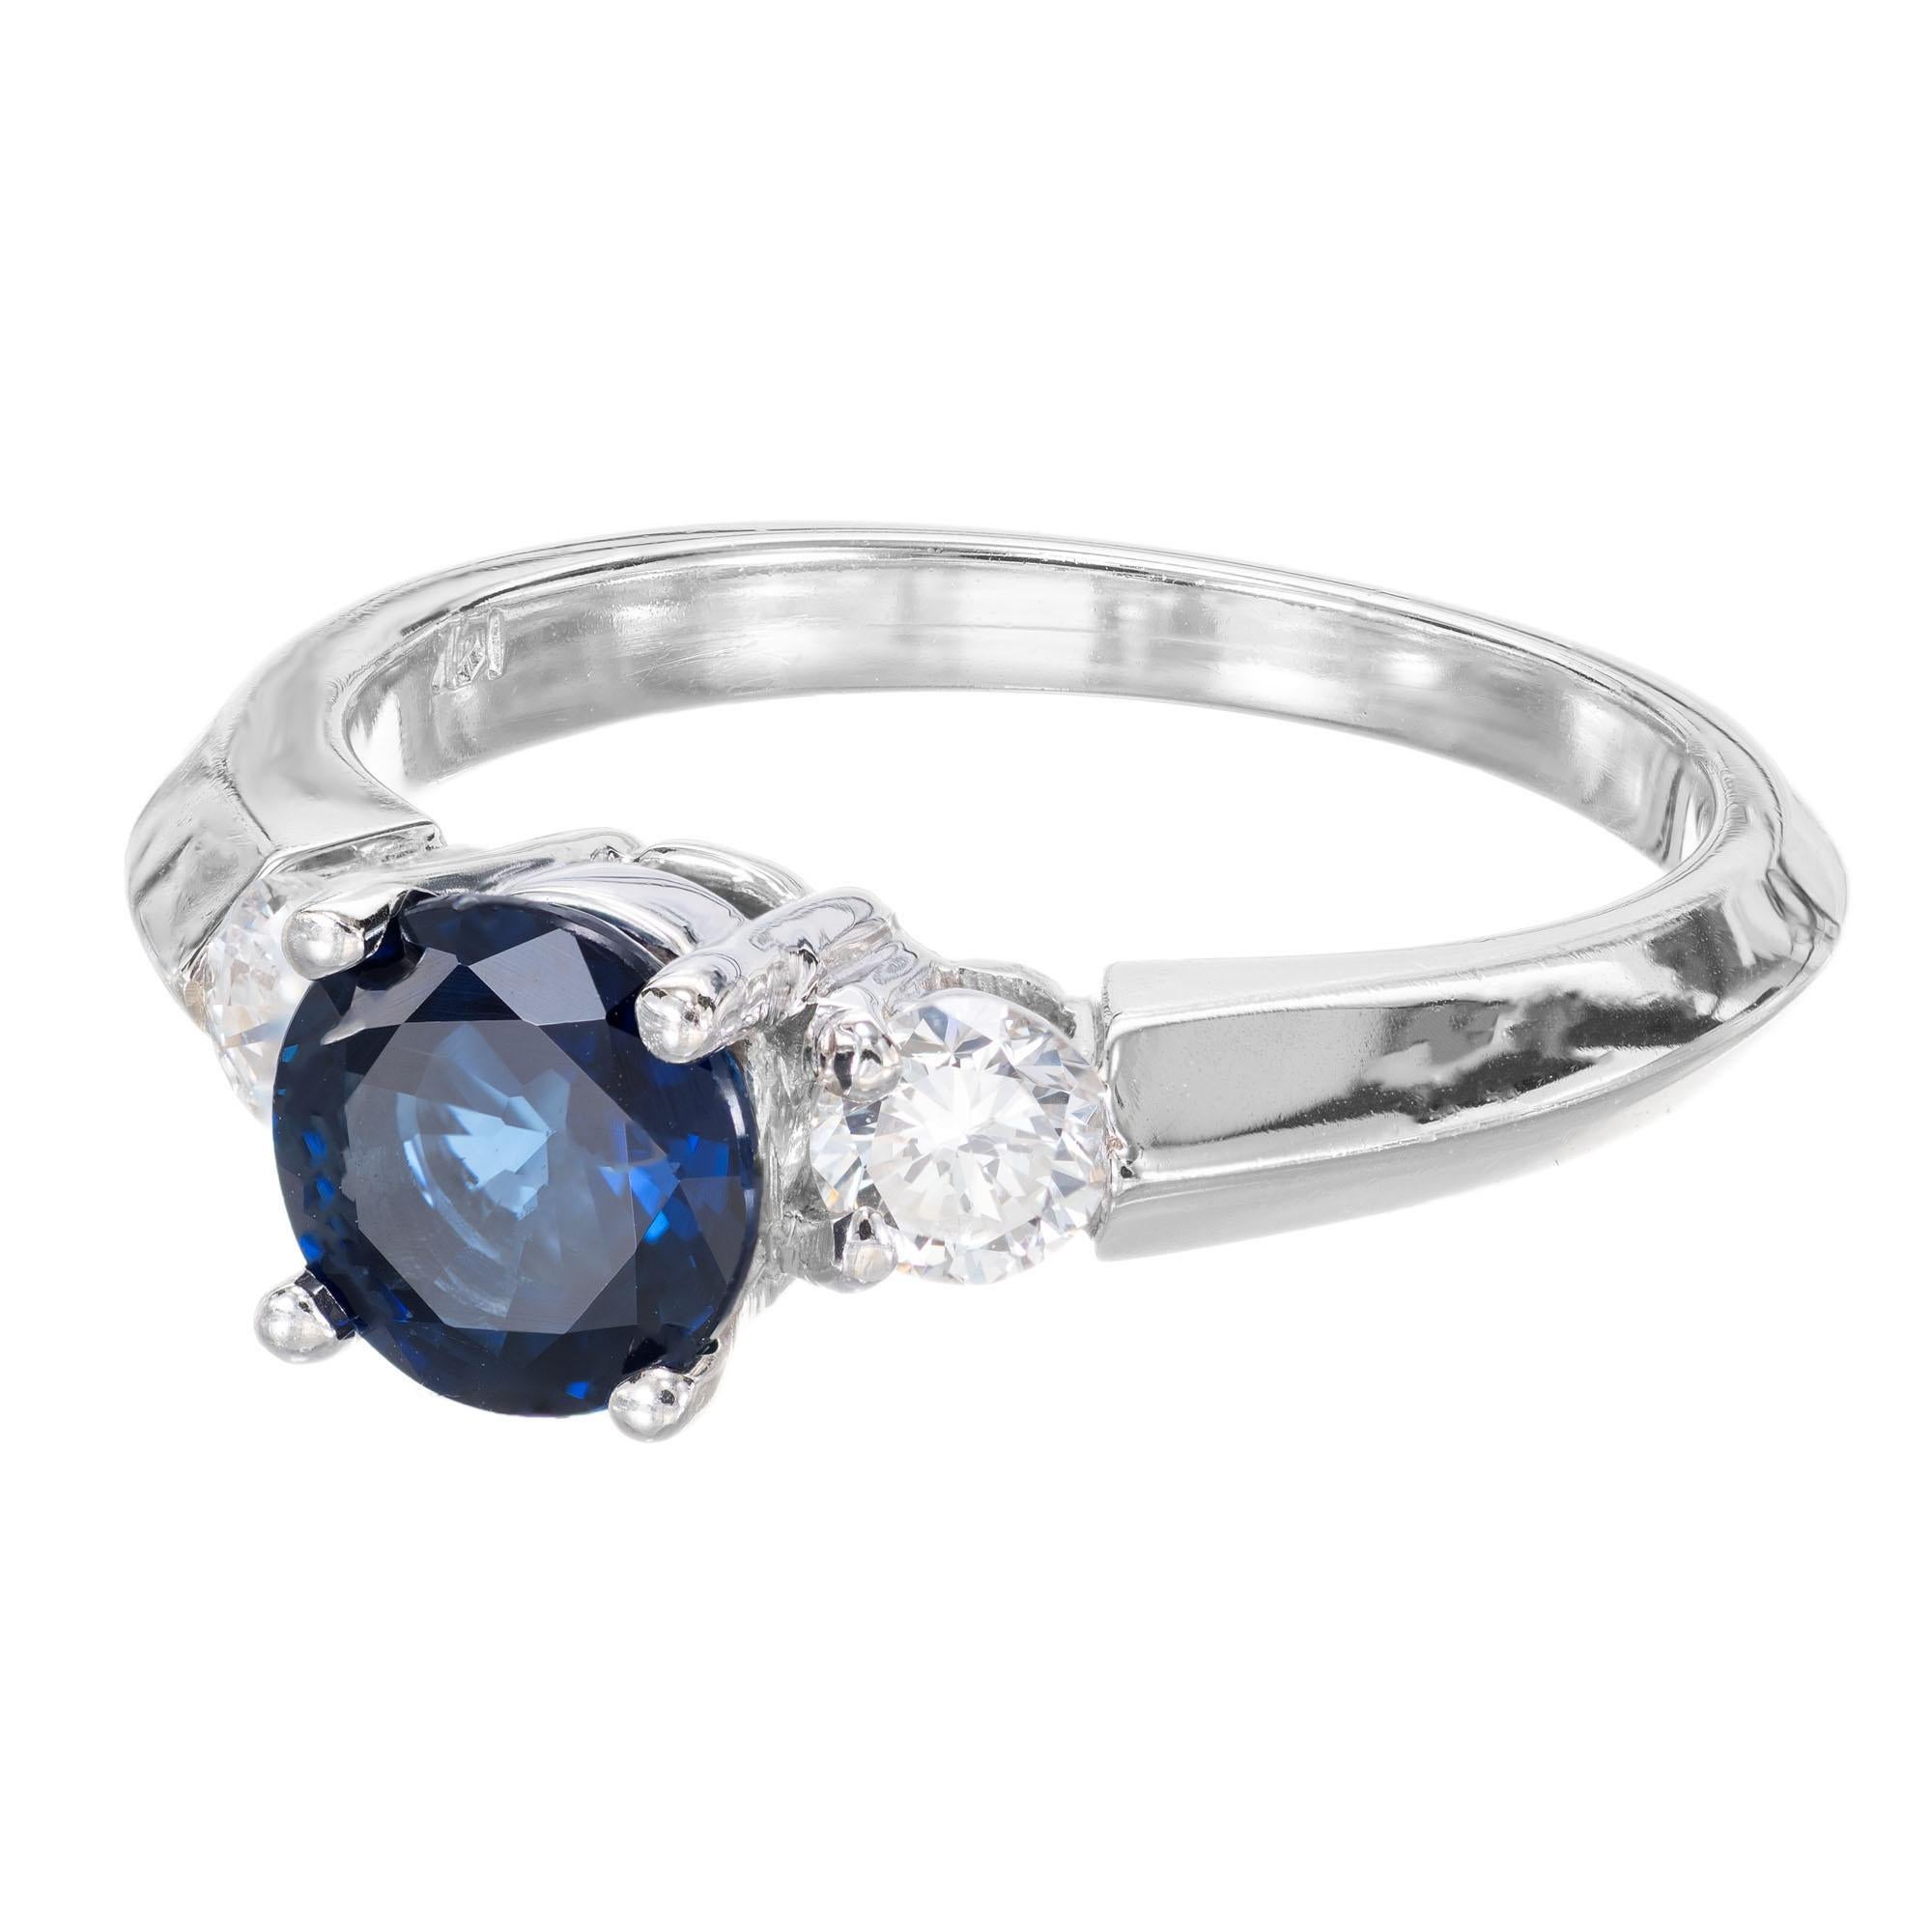 Round Sapphire and diamond engagement ring. AGL certified center sapphire in a 14k white gold three-stone setting with two round accent diamonds. 

1 Top gem bright blue Sapphire, approx. total weight 1.08cts, simple heat only, no other